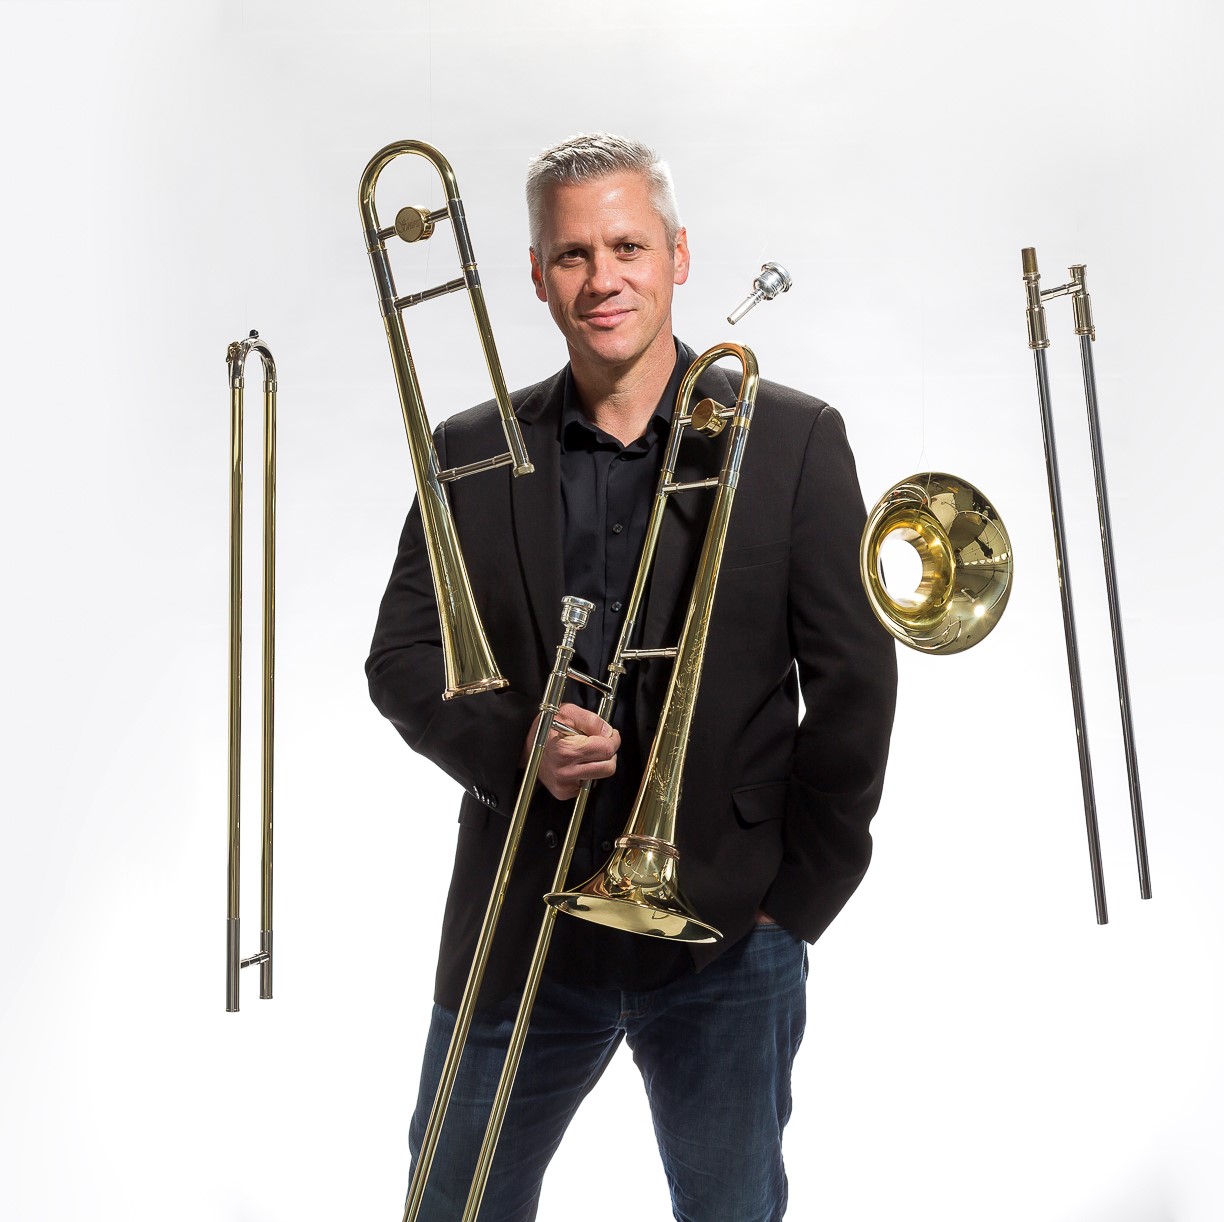 A smiling man stands holding a trombone as trombone parts float around him